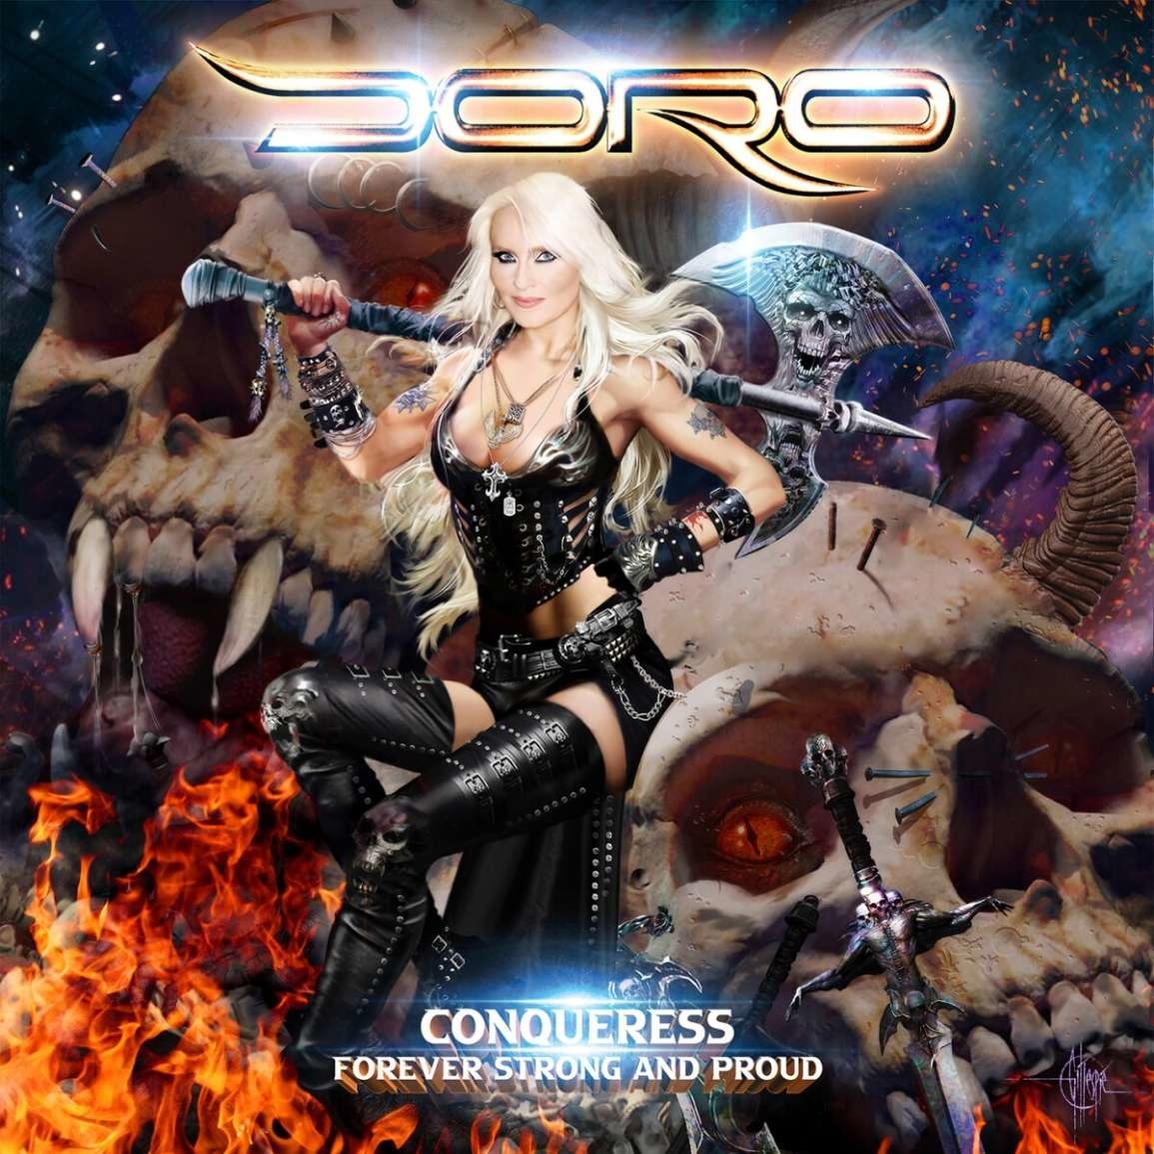 Proud Conqueress - and Forever (Vinyl) - - Strong Doro